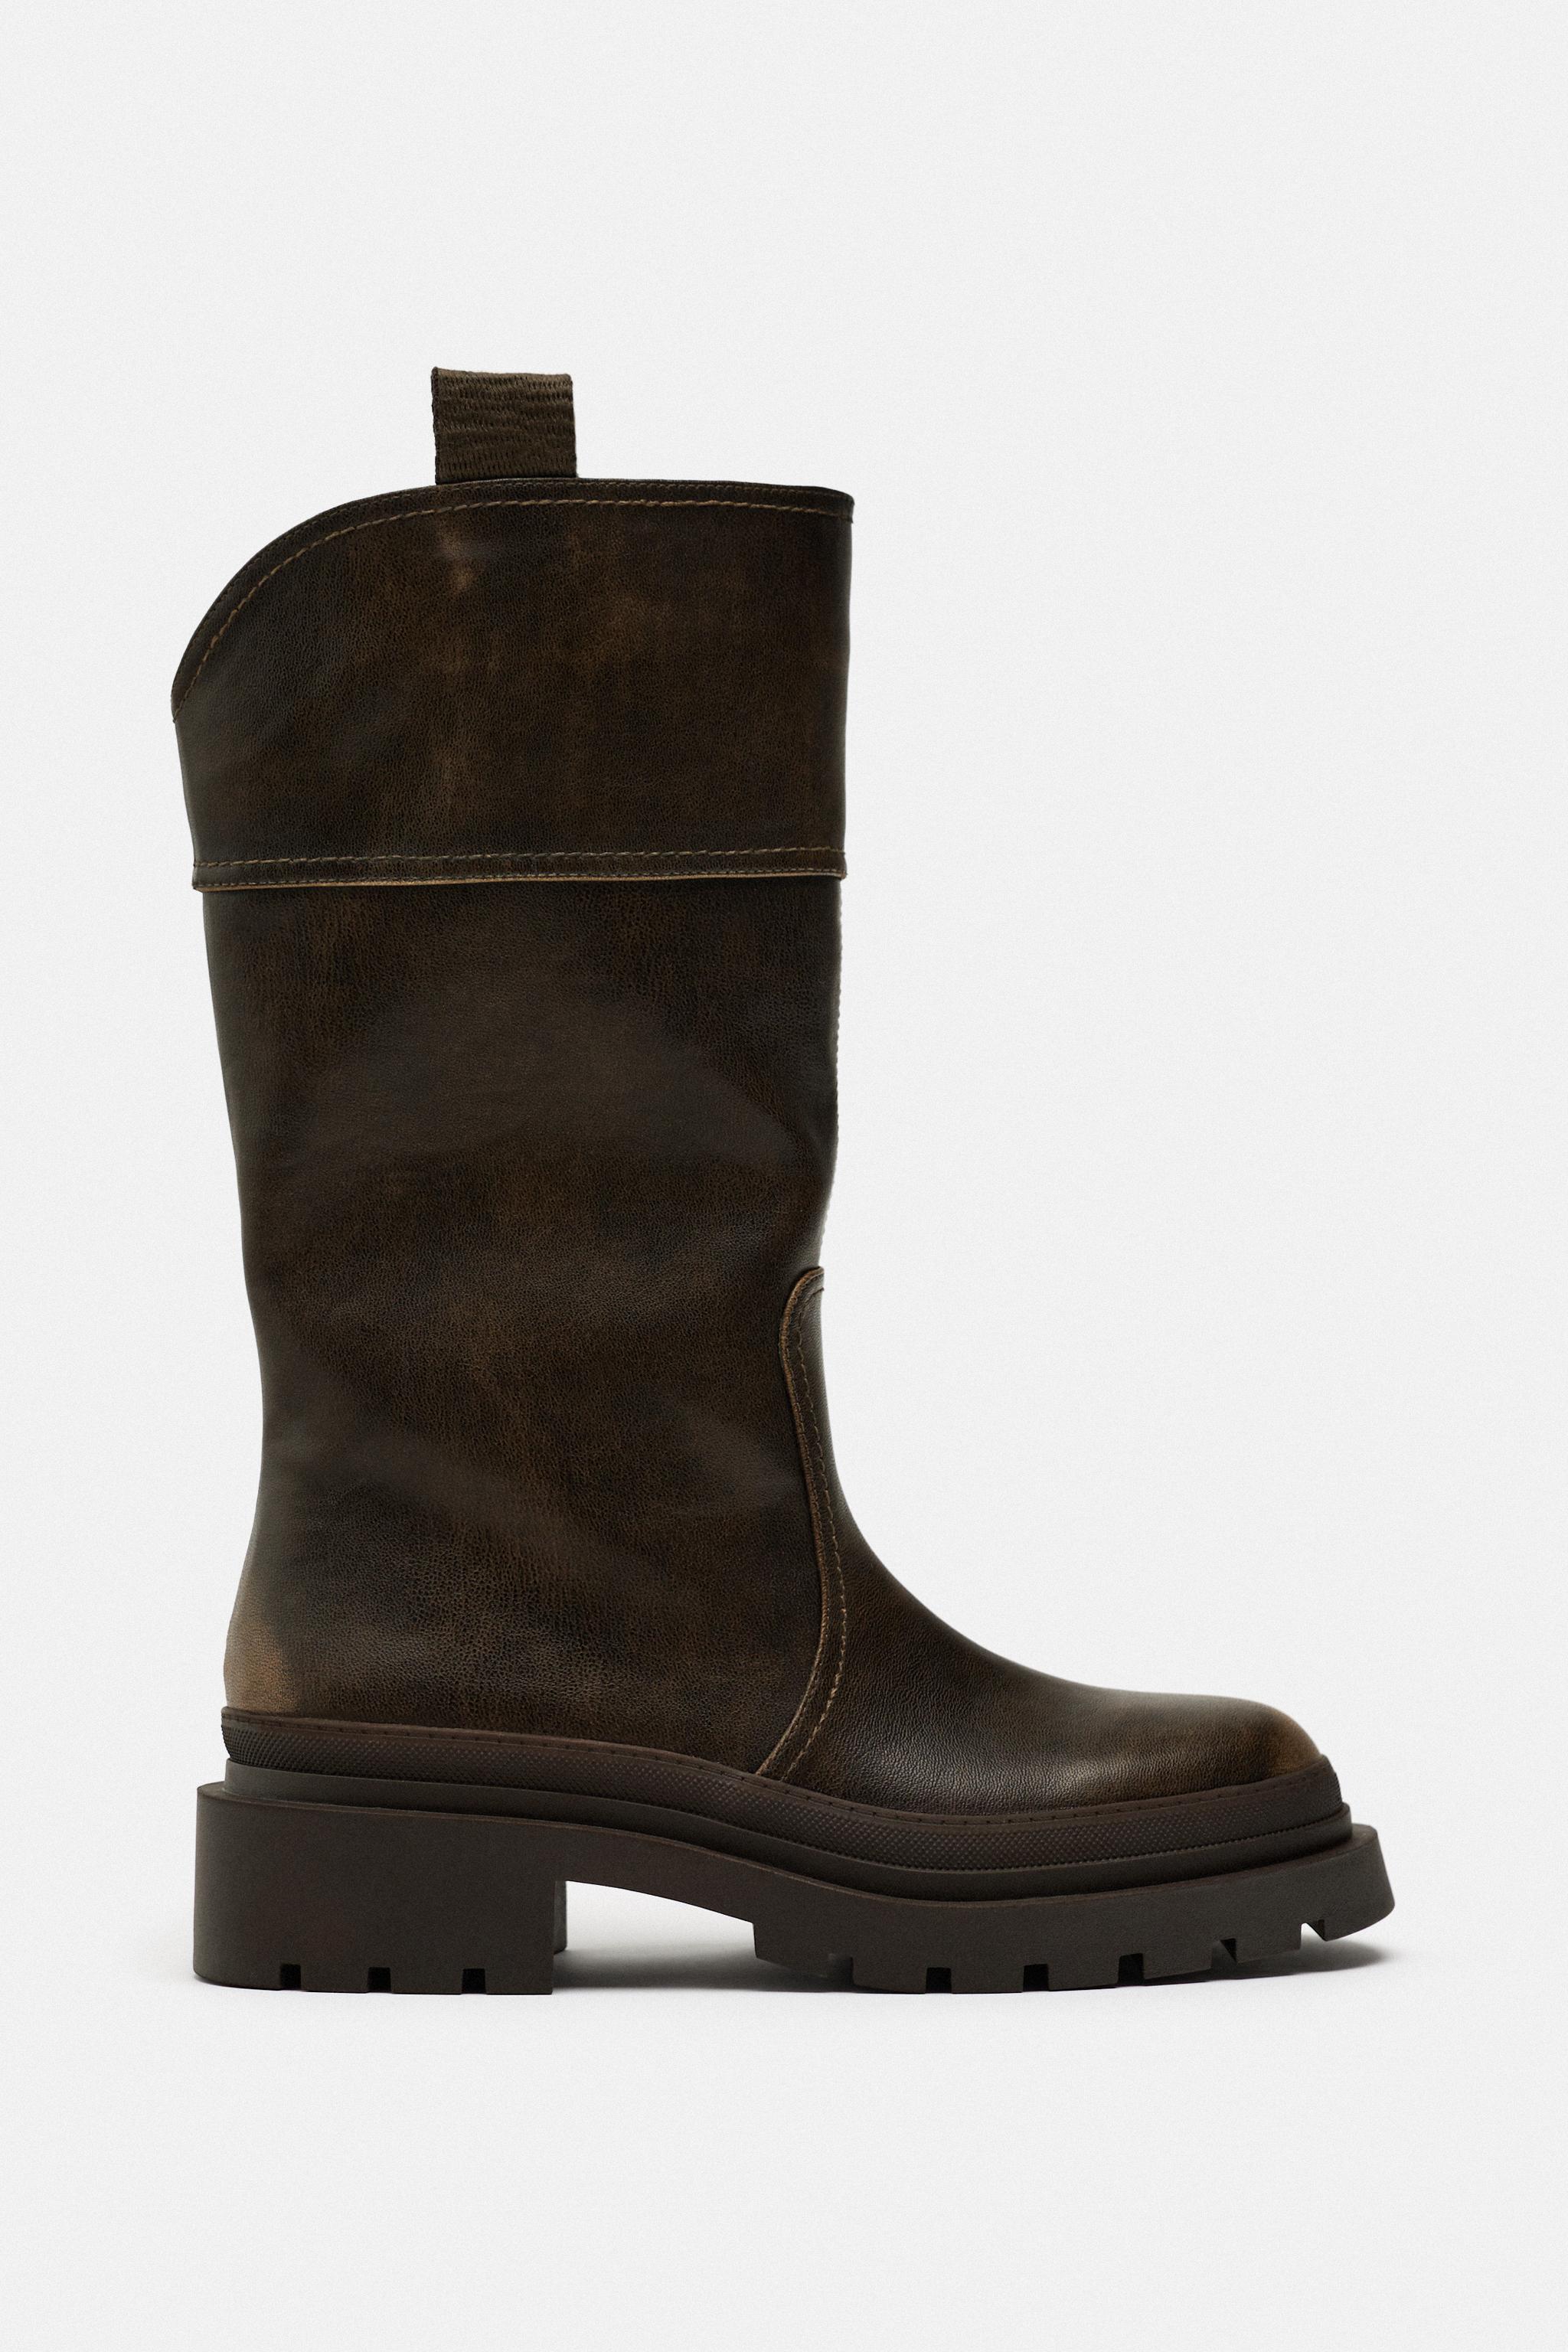 LOW HEELED RUBBER SOLE BOOTS